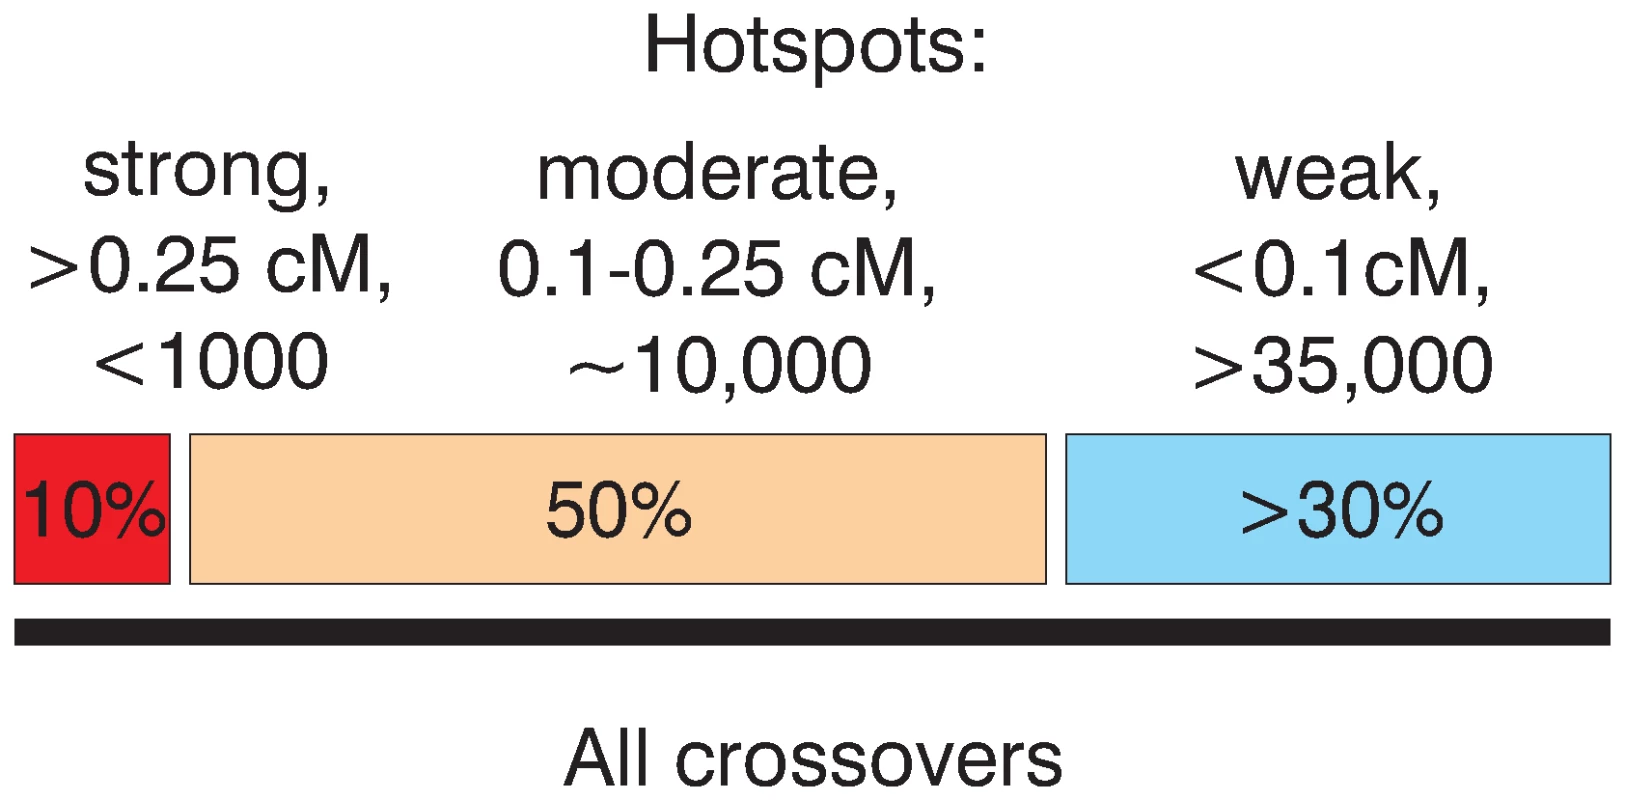 Schematic representation of the relative input of strong and weak hotspots to the total set of crossovers.